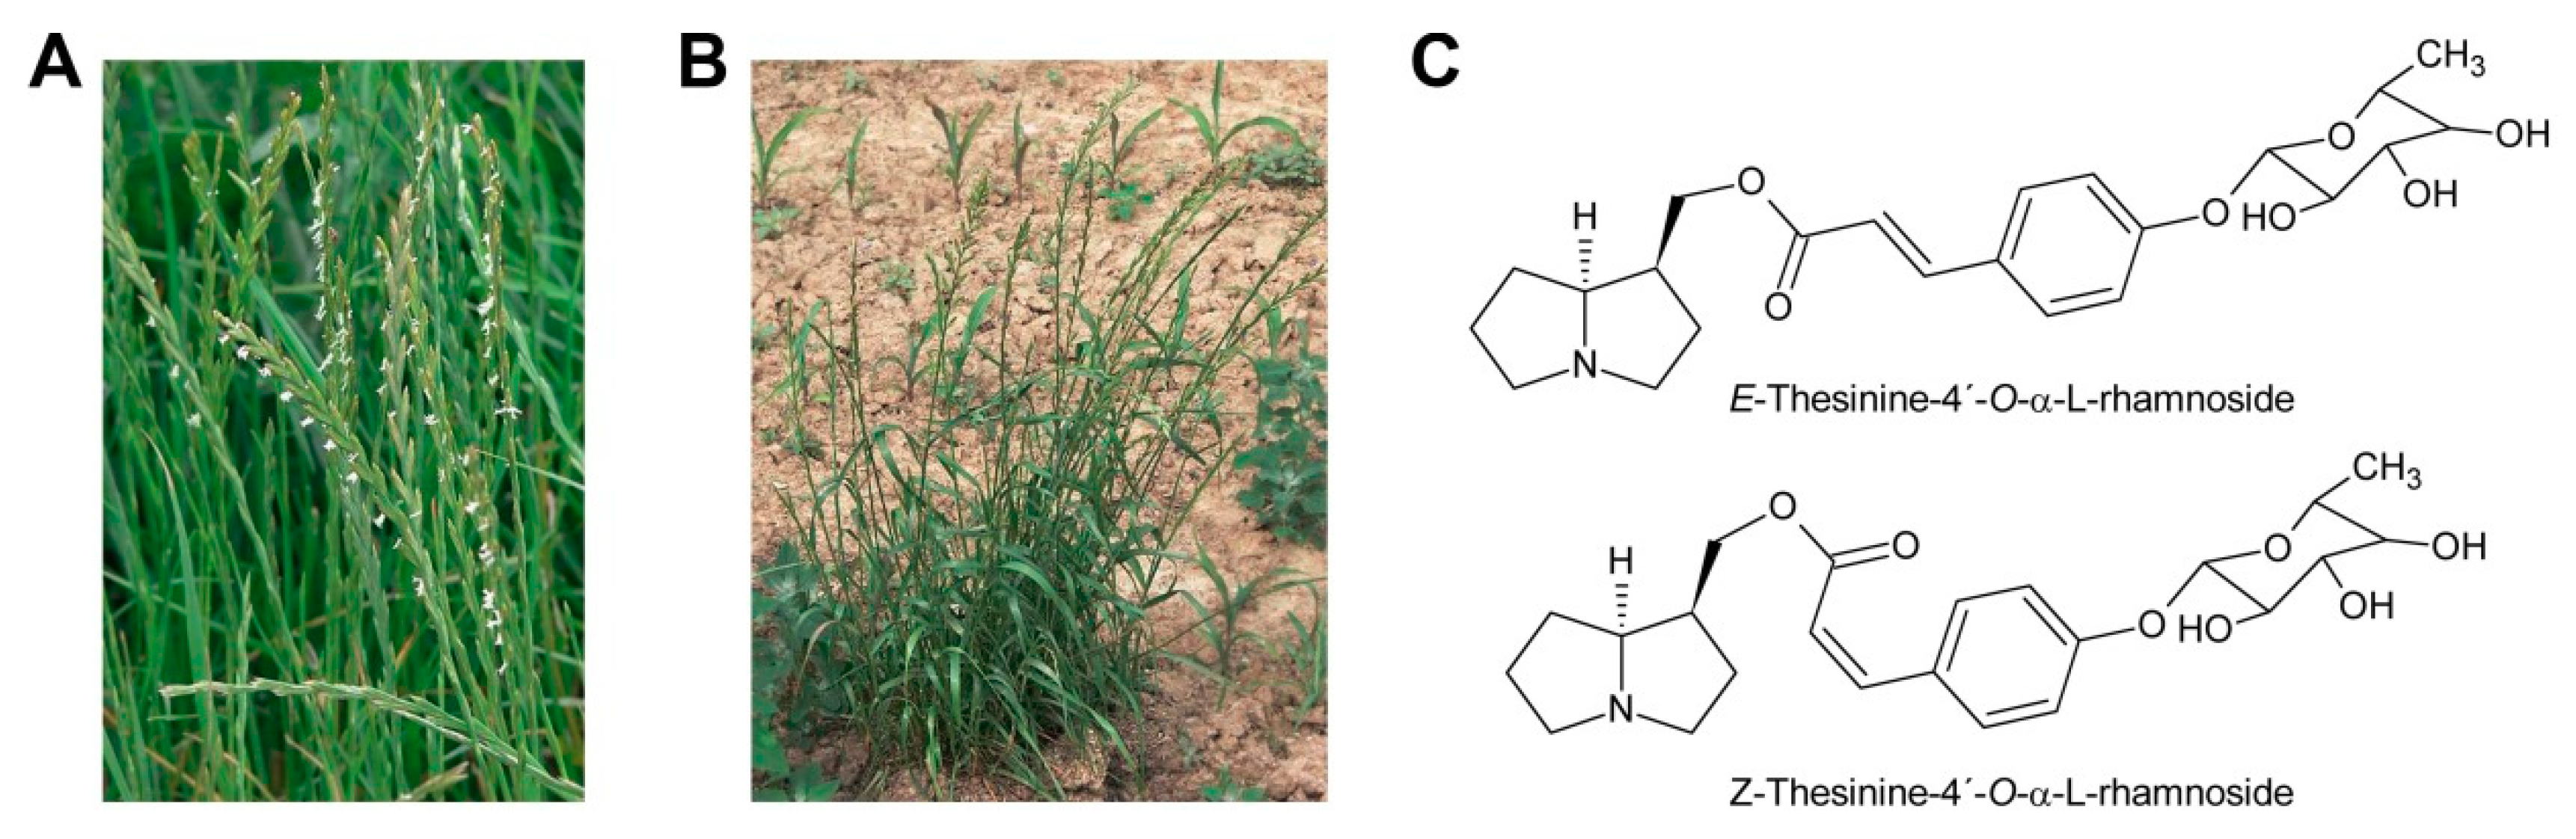 Molecules Free Full Text Pyrrolizidine Alkaloids Biosynthesis Biological Activities And Occurrence In Crop Plants Html